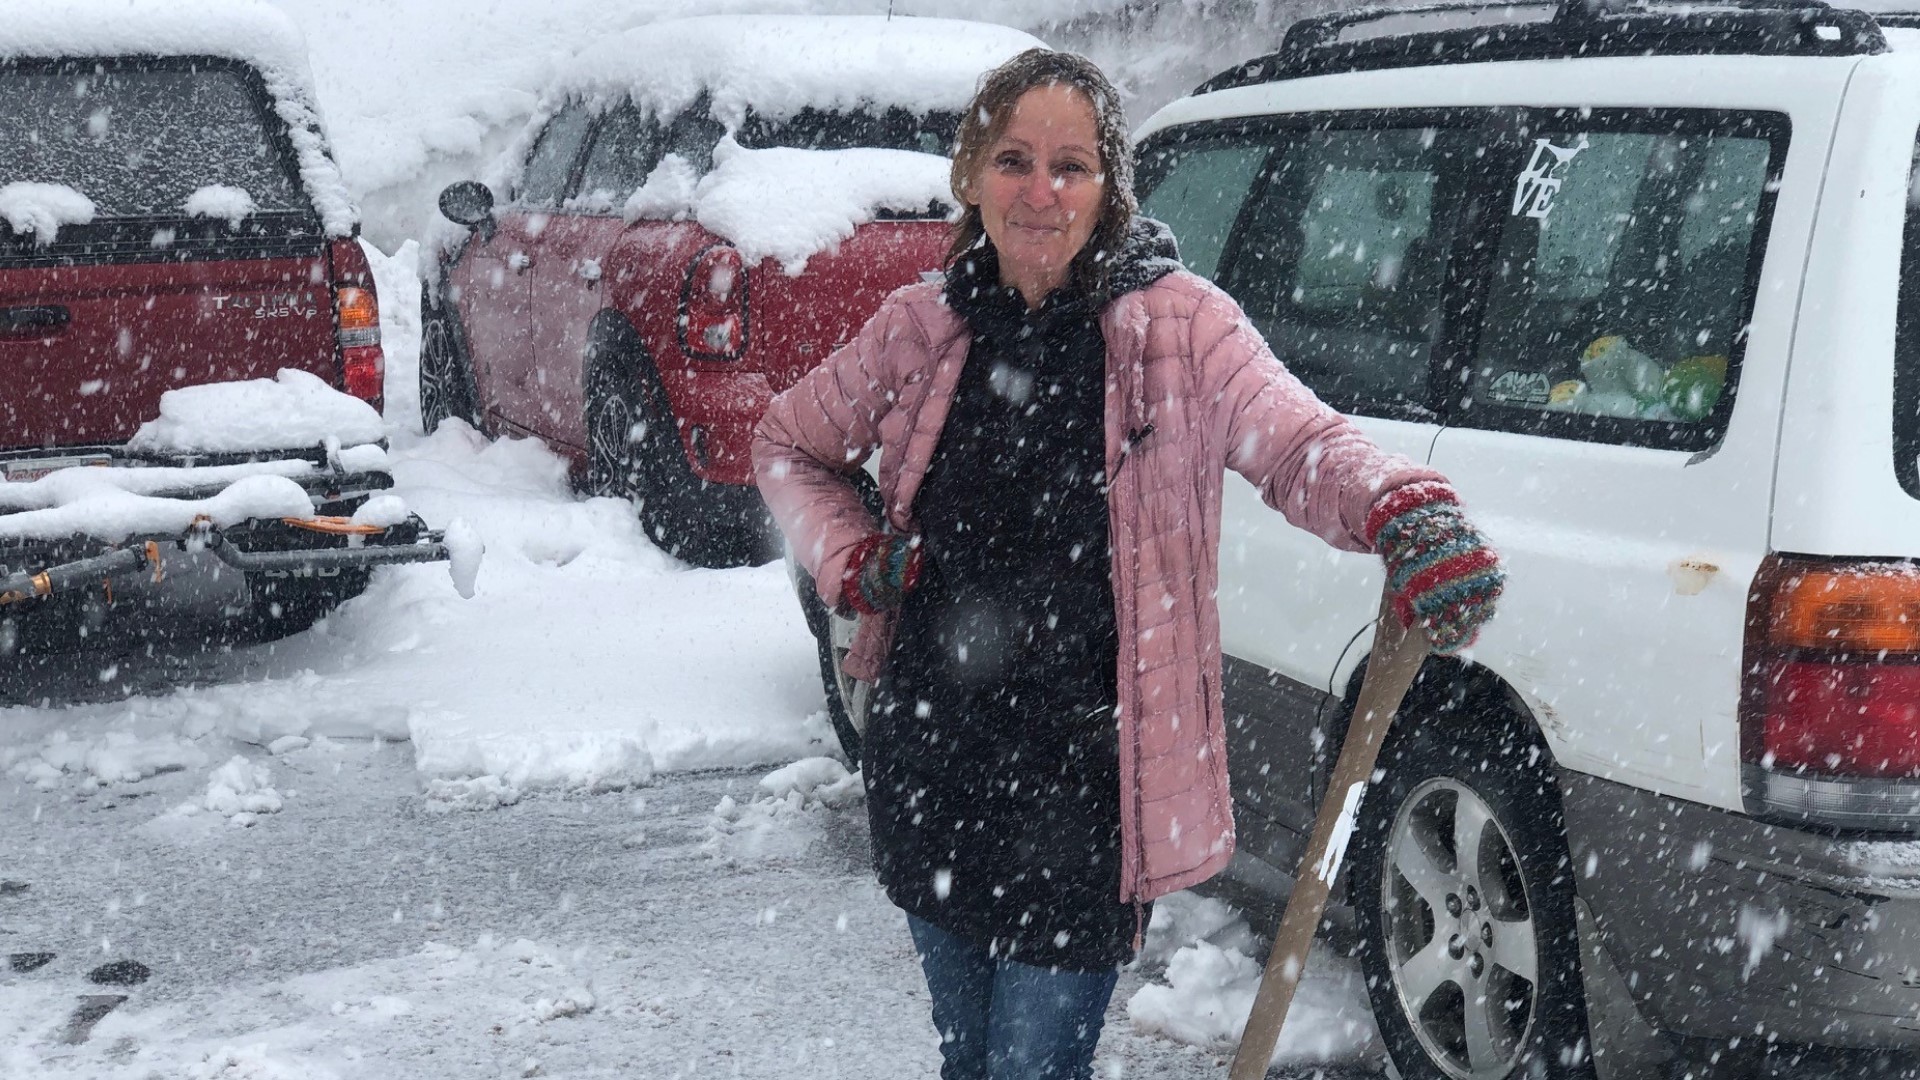 The people of Soda Springs are hoping for an end to the winter-like weather in their area. Many residents have never seen so much snow before summer.